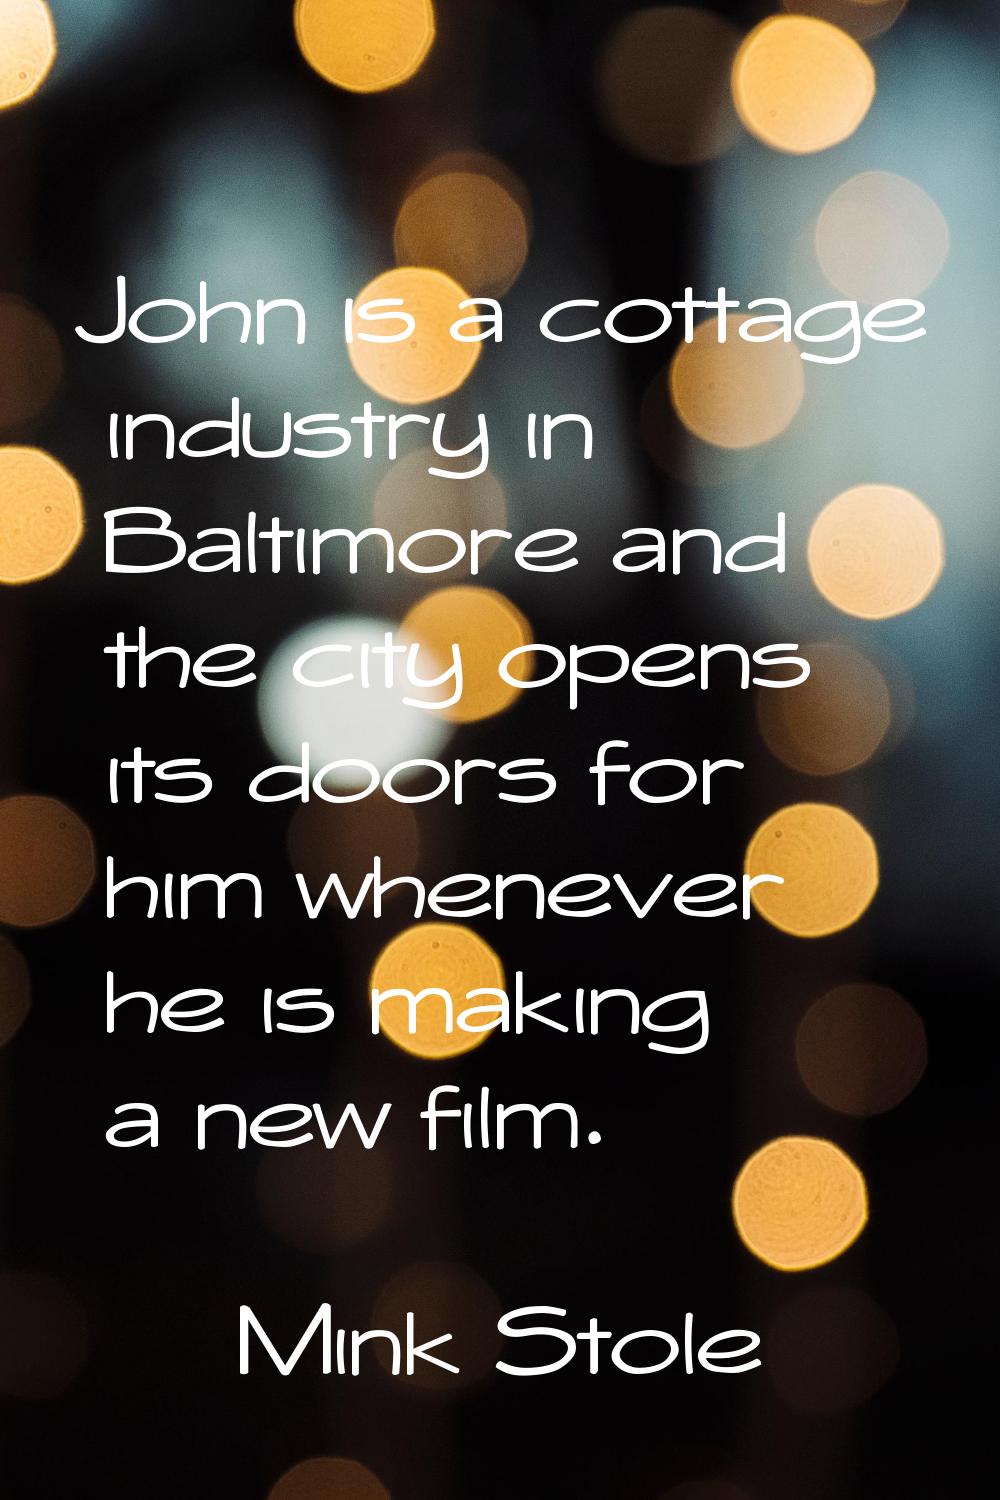 John is a cottage industry in Baltimore and the city opens its doors for him whenever he is making 